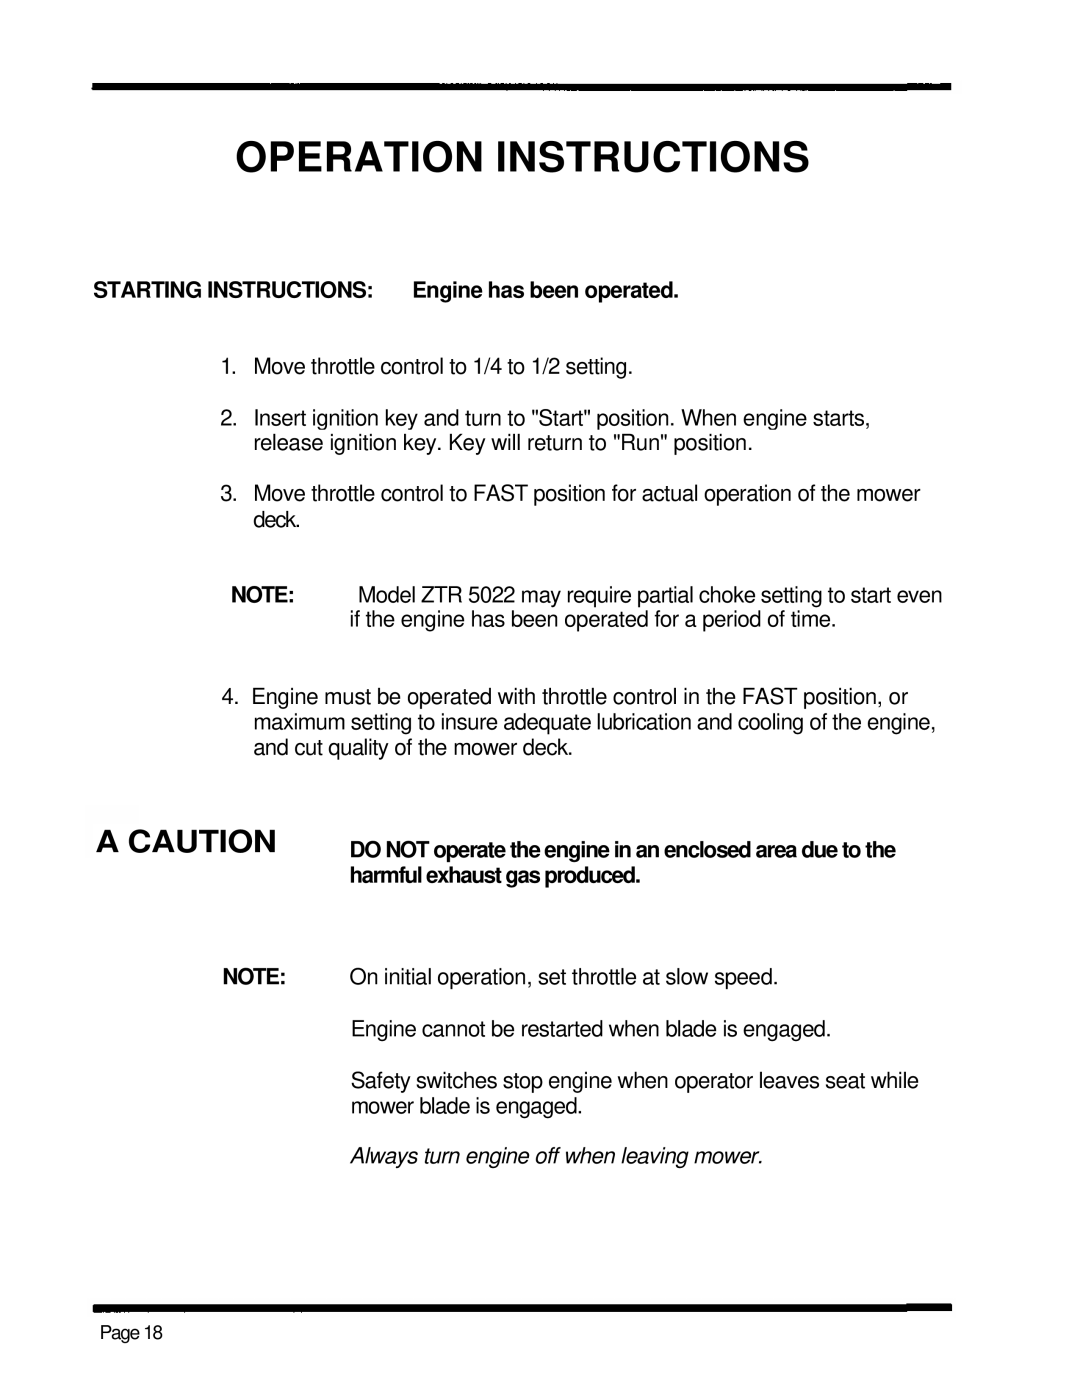 Dixon 5000 Series manual A Caution, Operation Instructions, STARTING INSTRUCTIONS Engine has been operated 